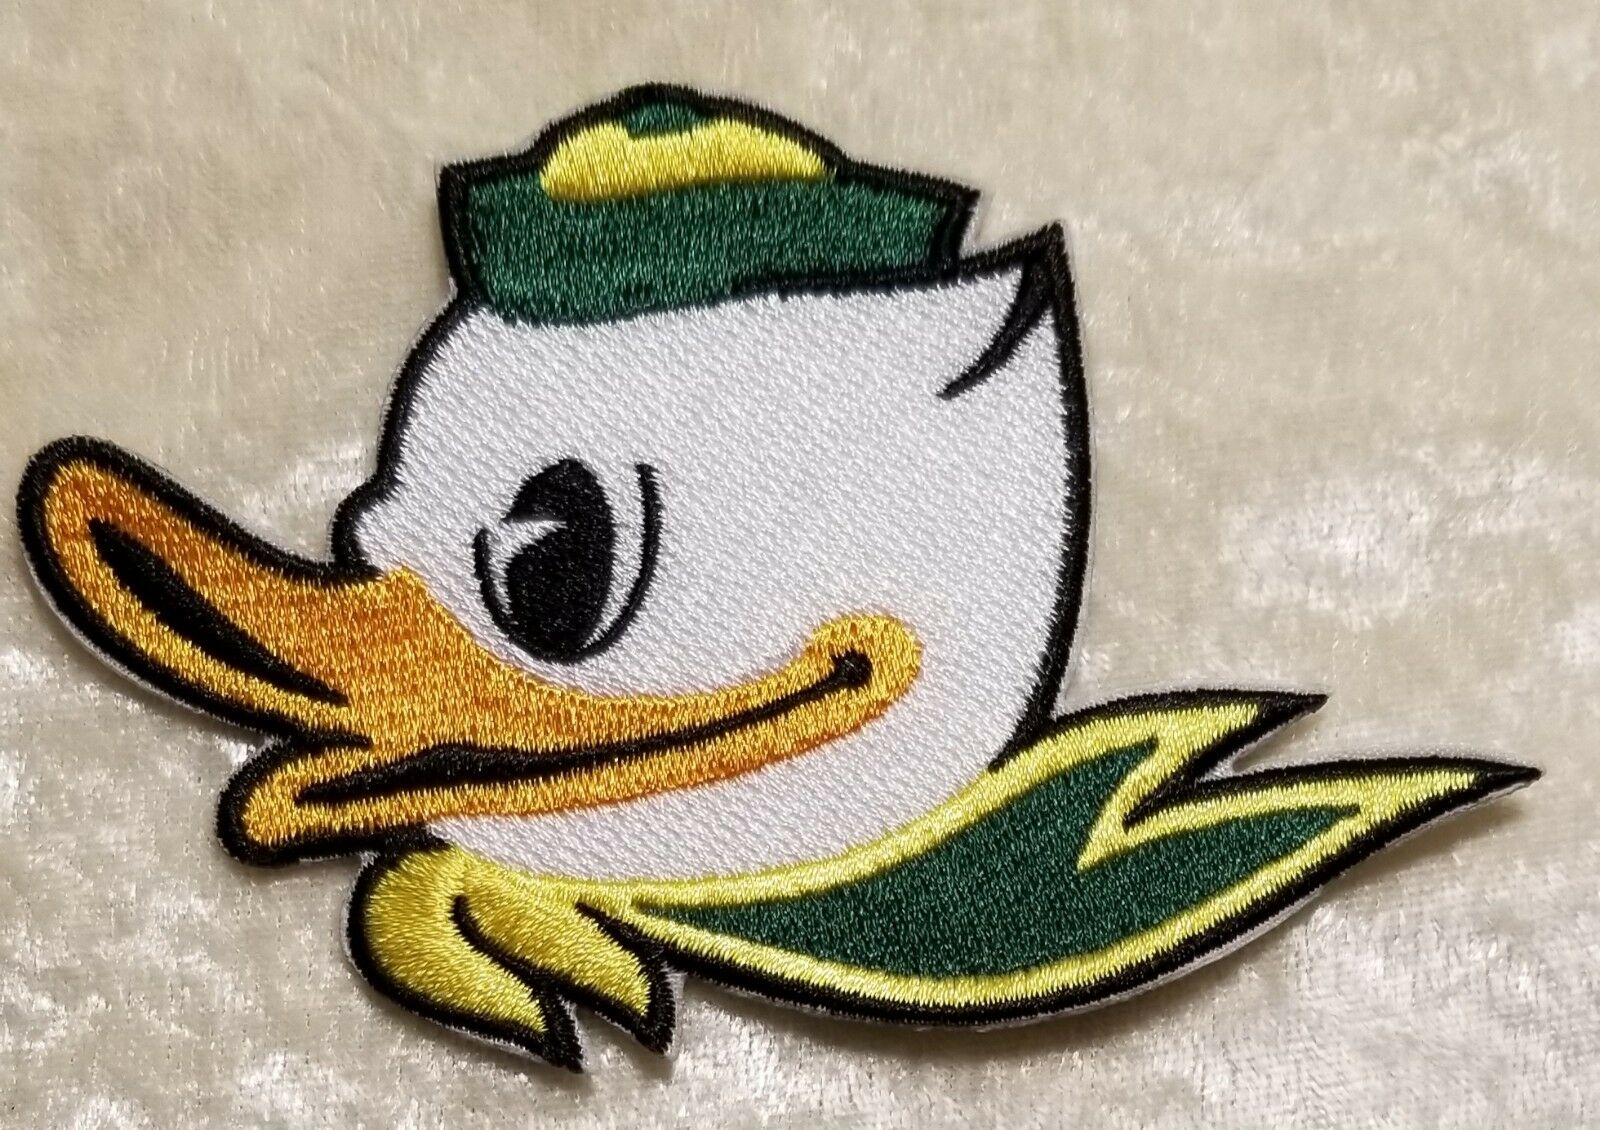 University Of Oregon Mascot The Duck 4.5" Iron On Embroidered Patch ~free Ship!